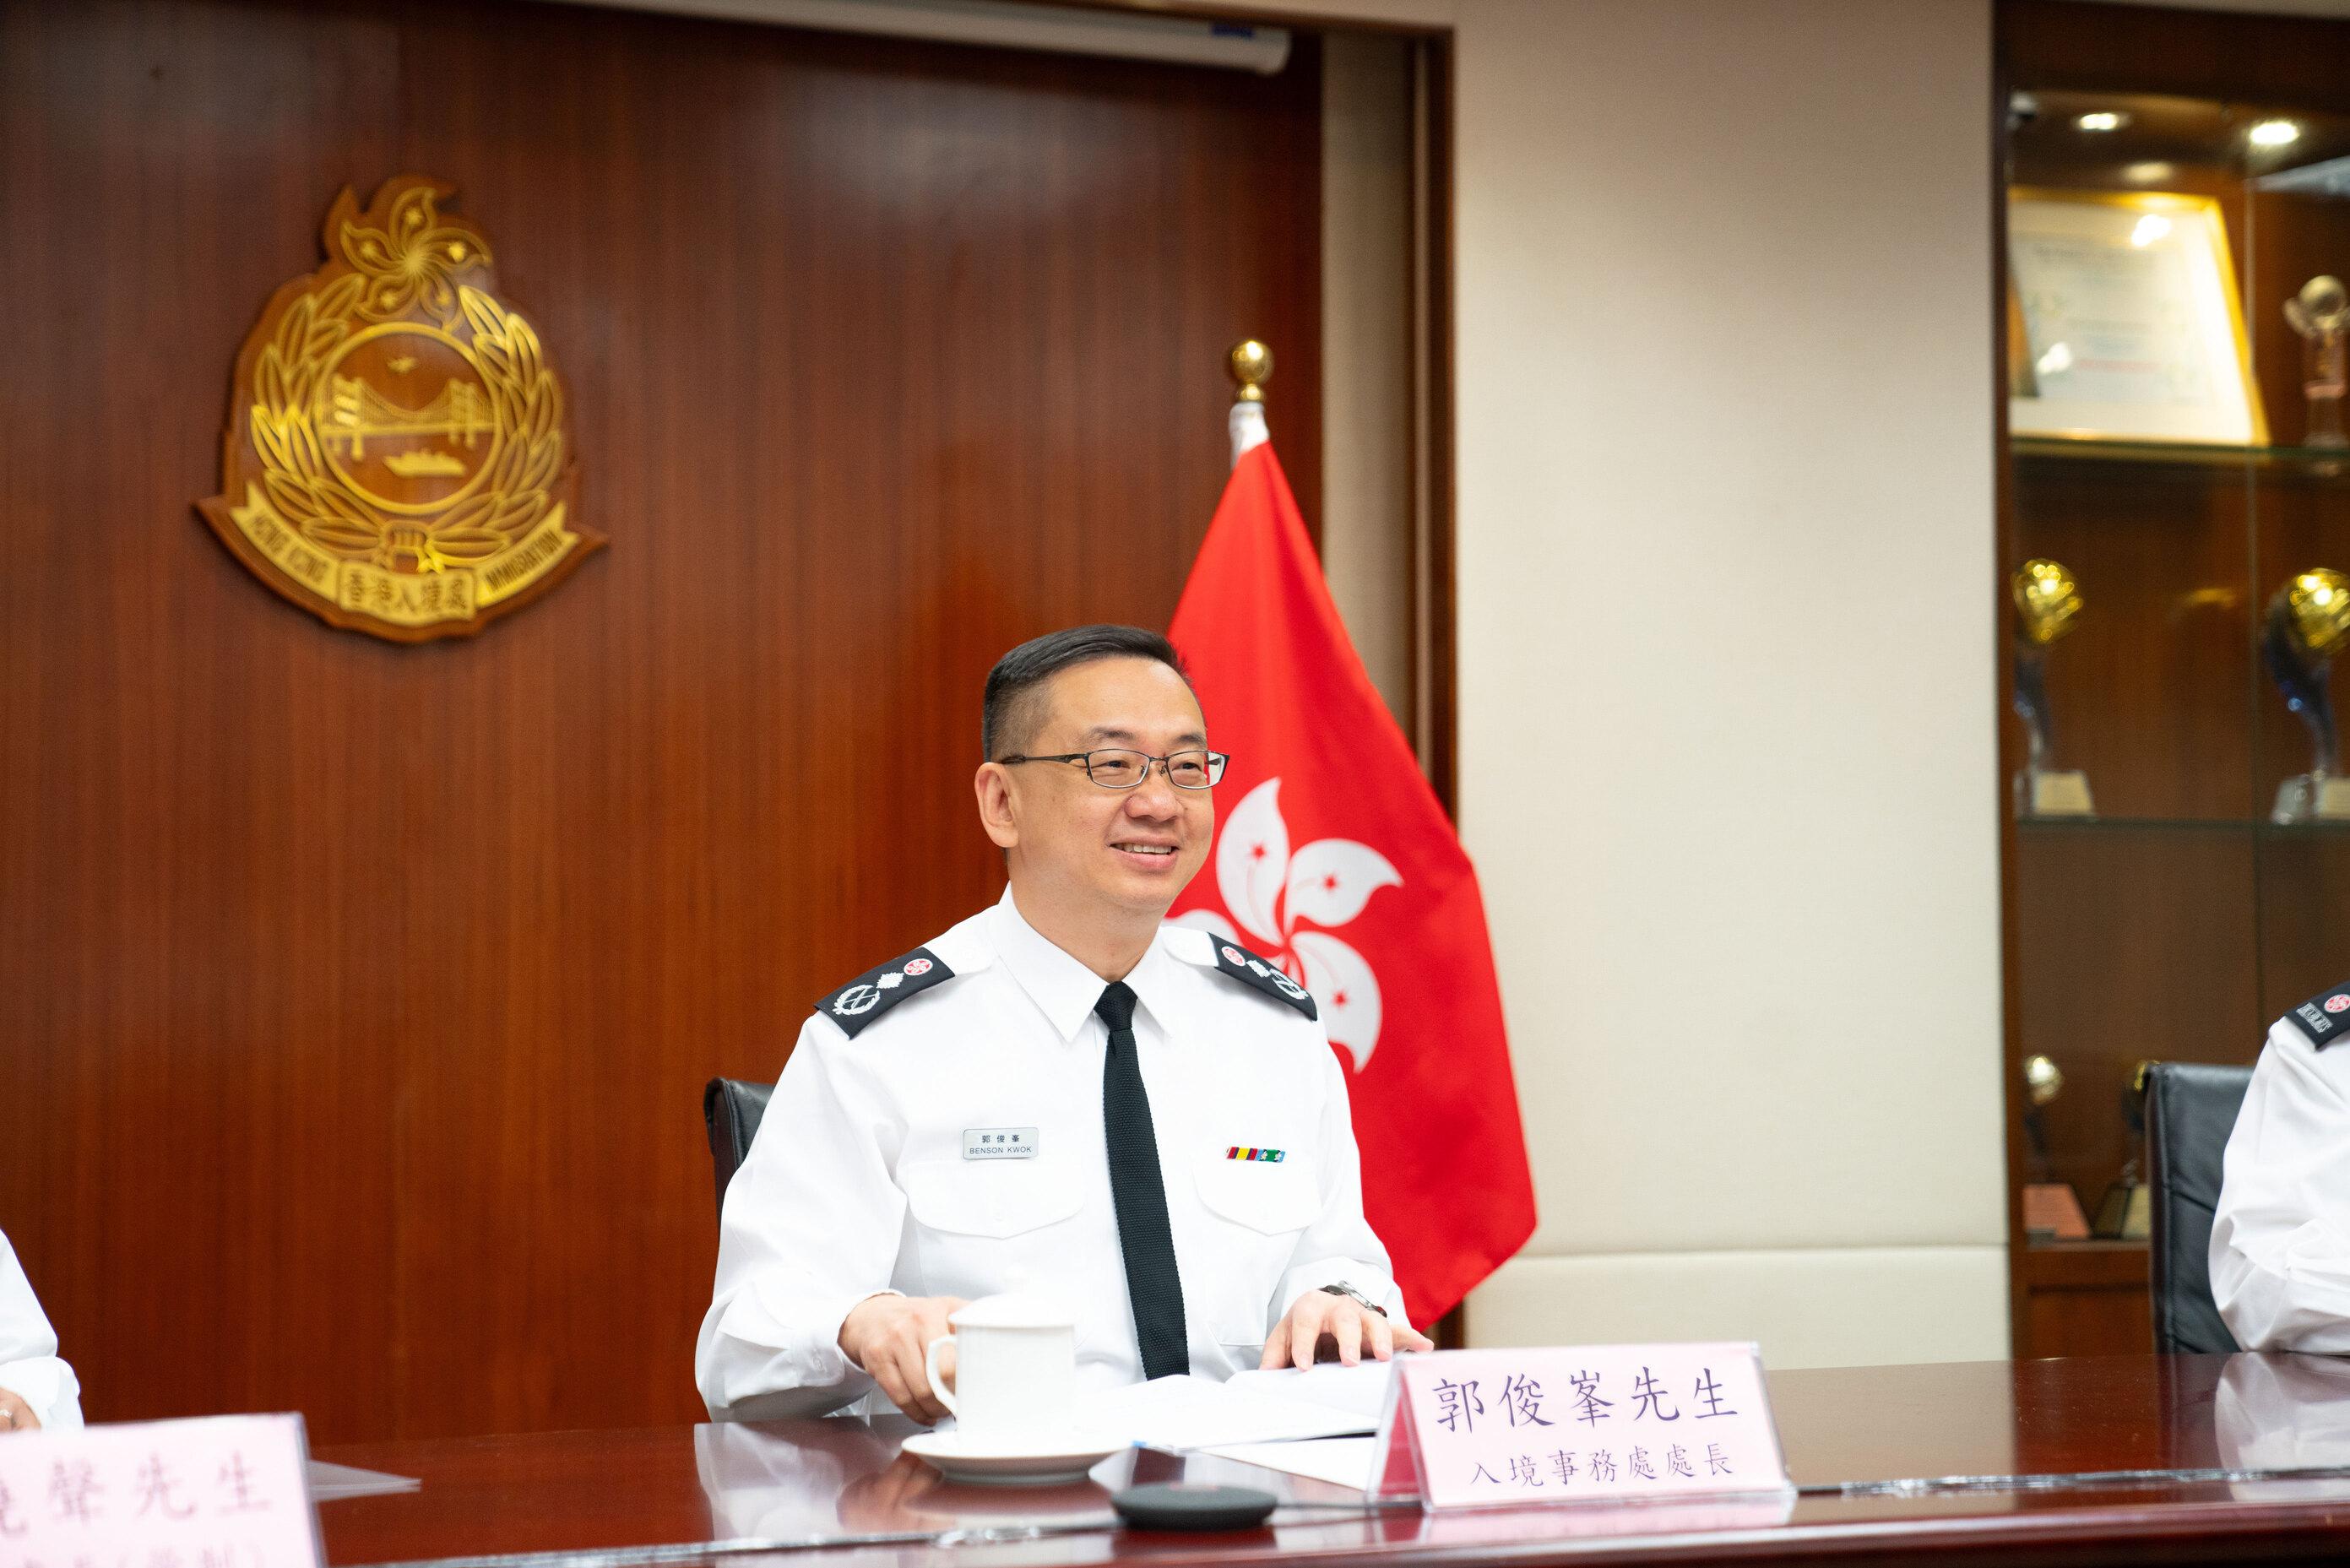 The Director of Immigration, Mr Benson Kwok (centre), held a video conference with the Commissioner of the Public Security Police Force of the Macao Special Administrative Region, Mr Ng Kam-wa, yesterday (December 5) to discuss the immigration arrangements on the polling day of the 2023 District Council Ordinary Election. Photo shows Mr Kwok speaking at the meeting.